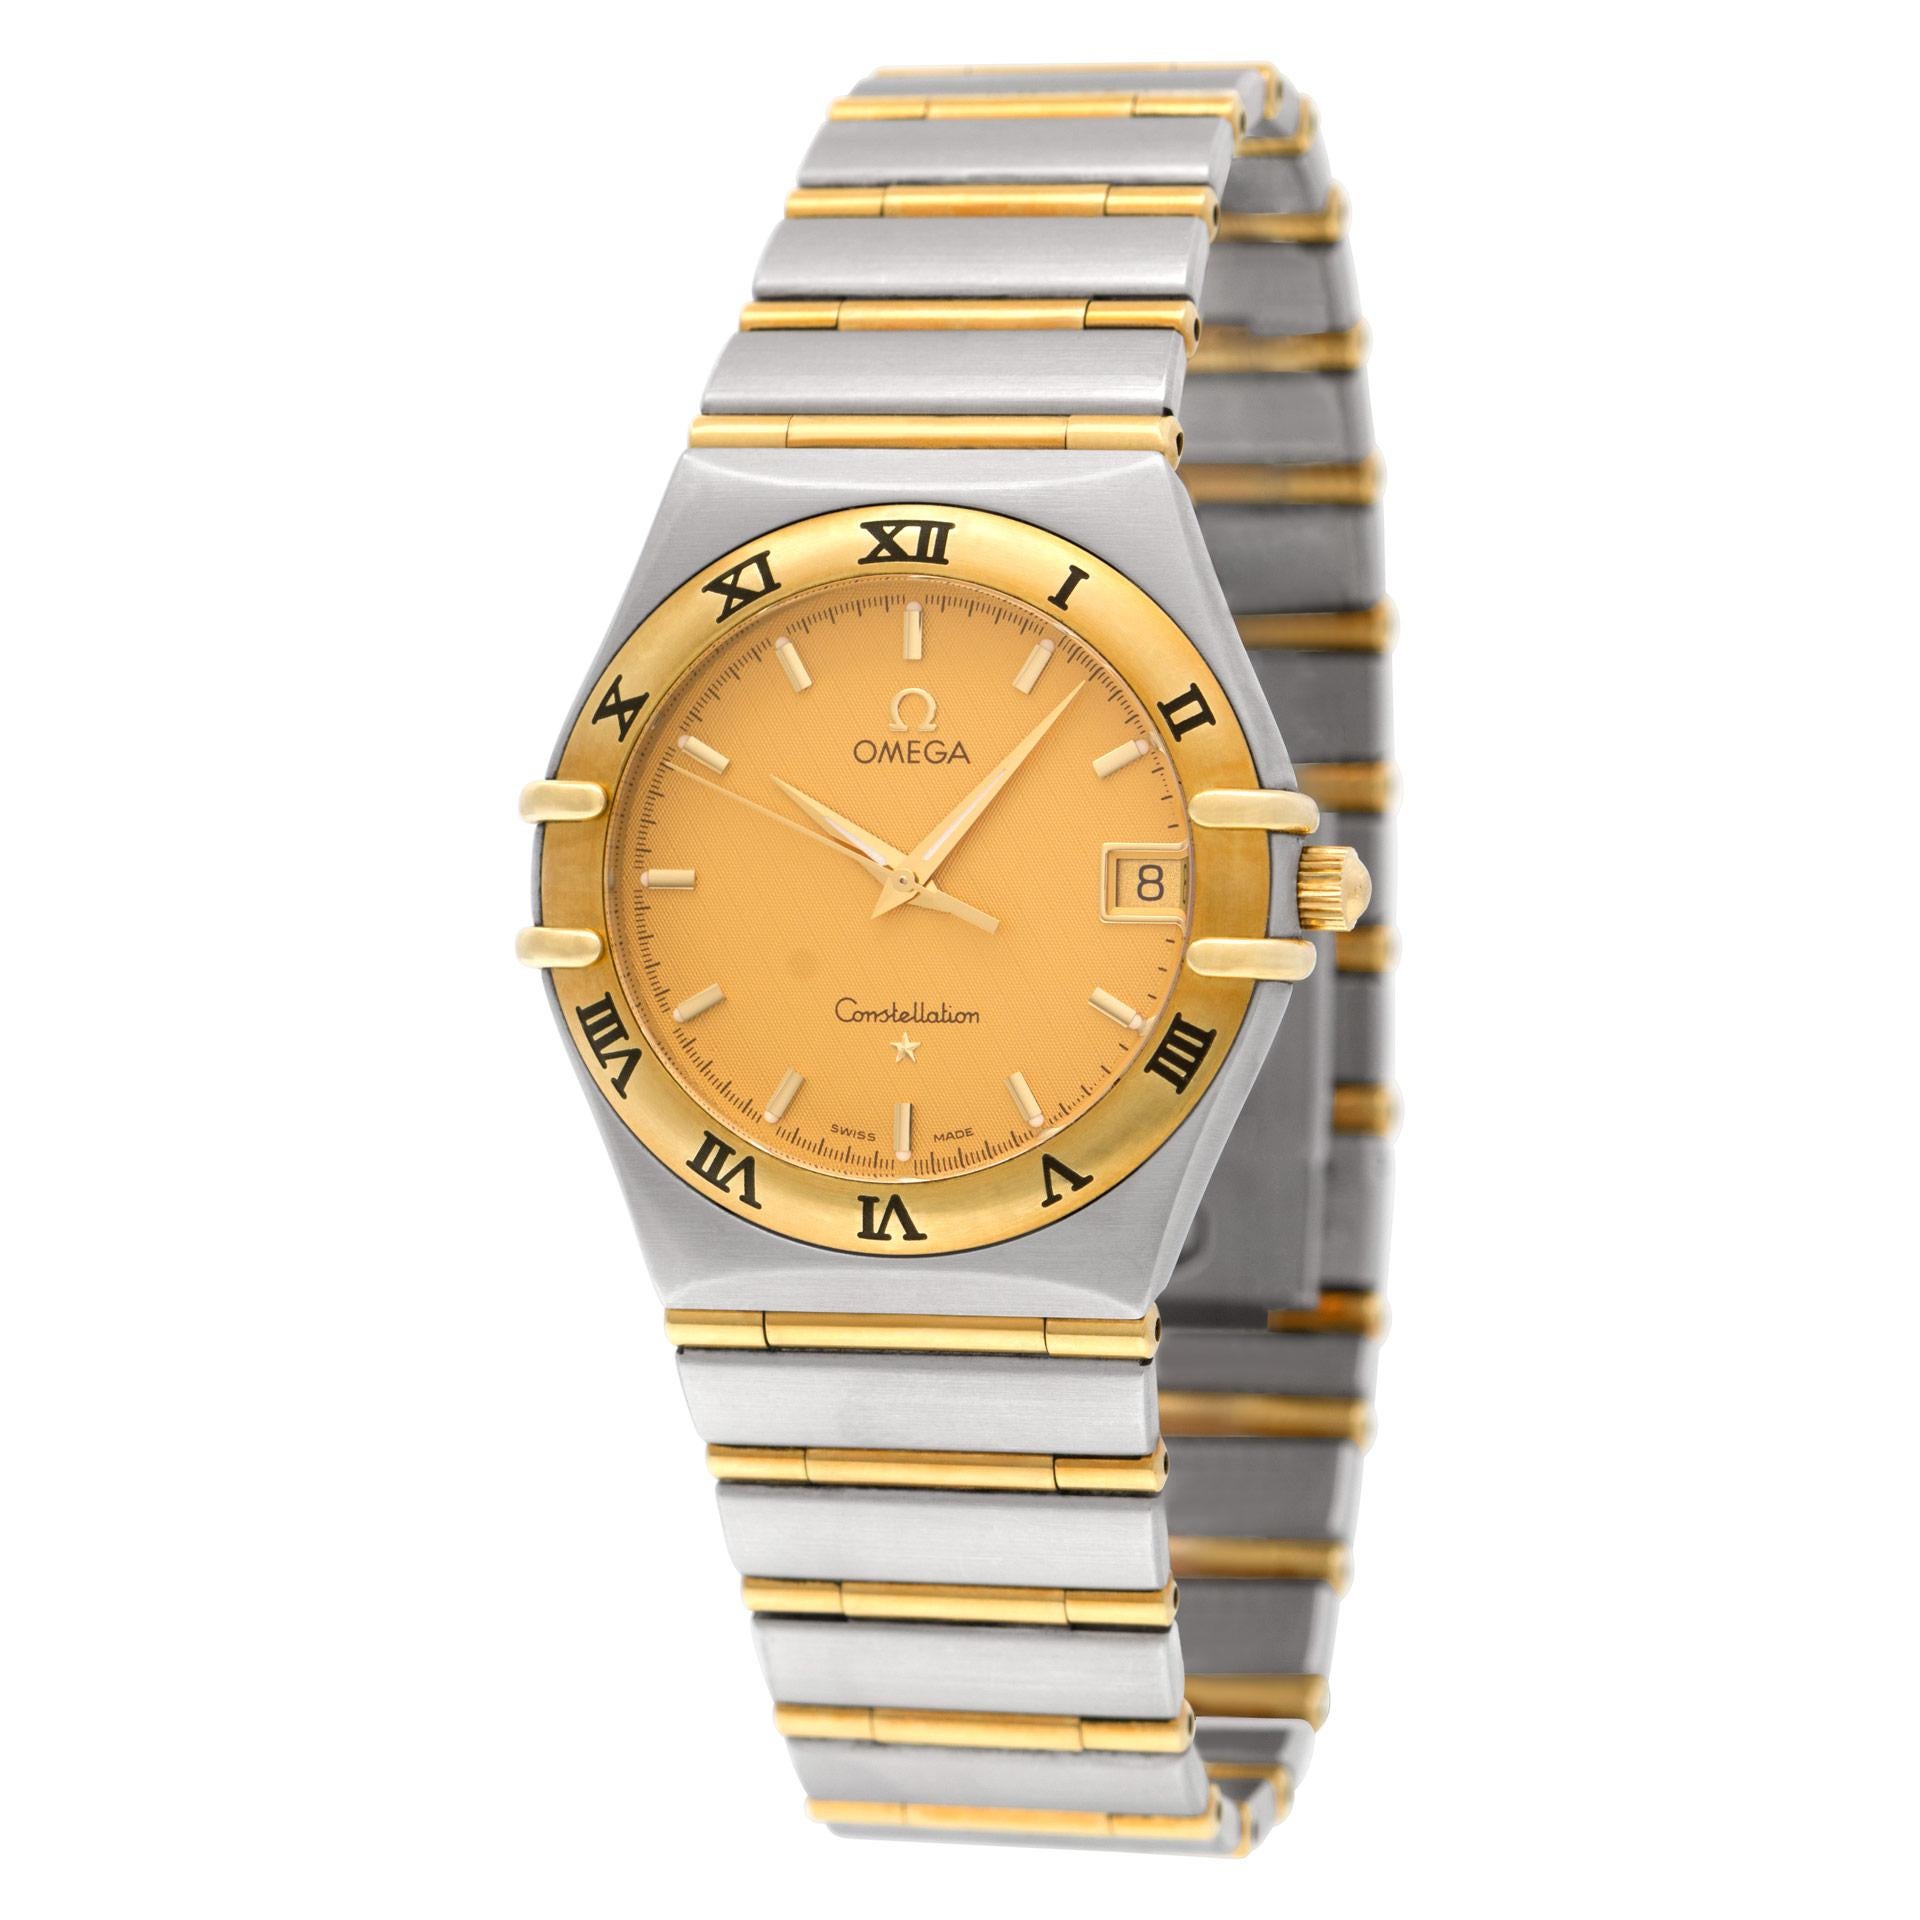 Omega Constellation in 18k yellow gold & stainless steel. Quartz w/ sweep seconds and date. 33 mm case size. Ref 59469775. Circa 1990s. Fine Pre-owned Omega Watch. Certified preowned Vintage Omega Constellation watch is made out of Stainless steel